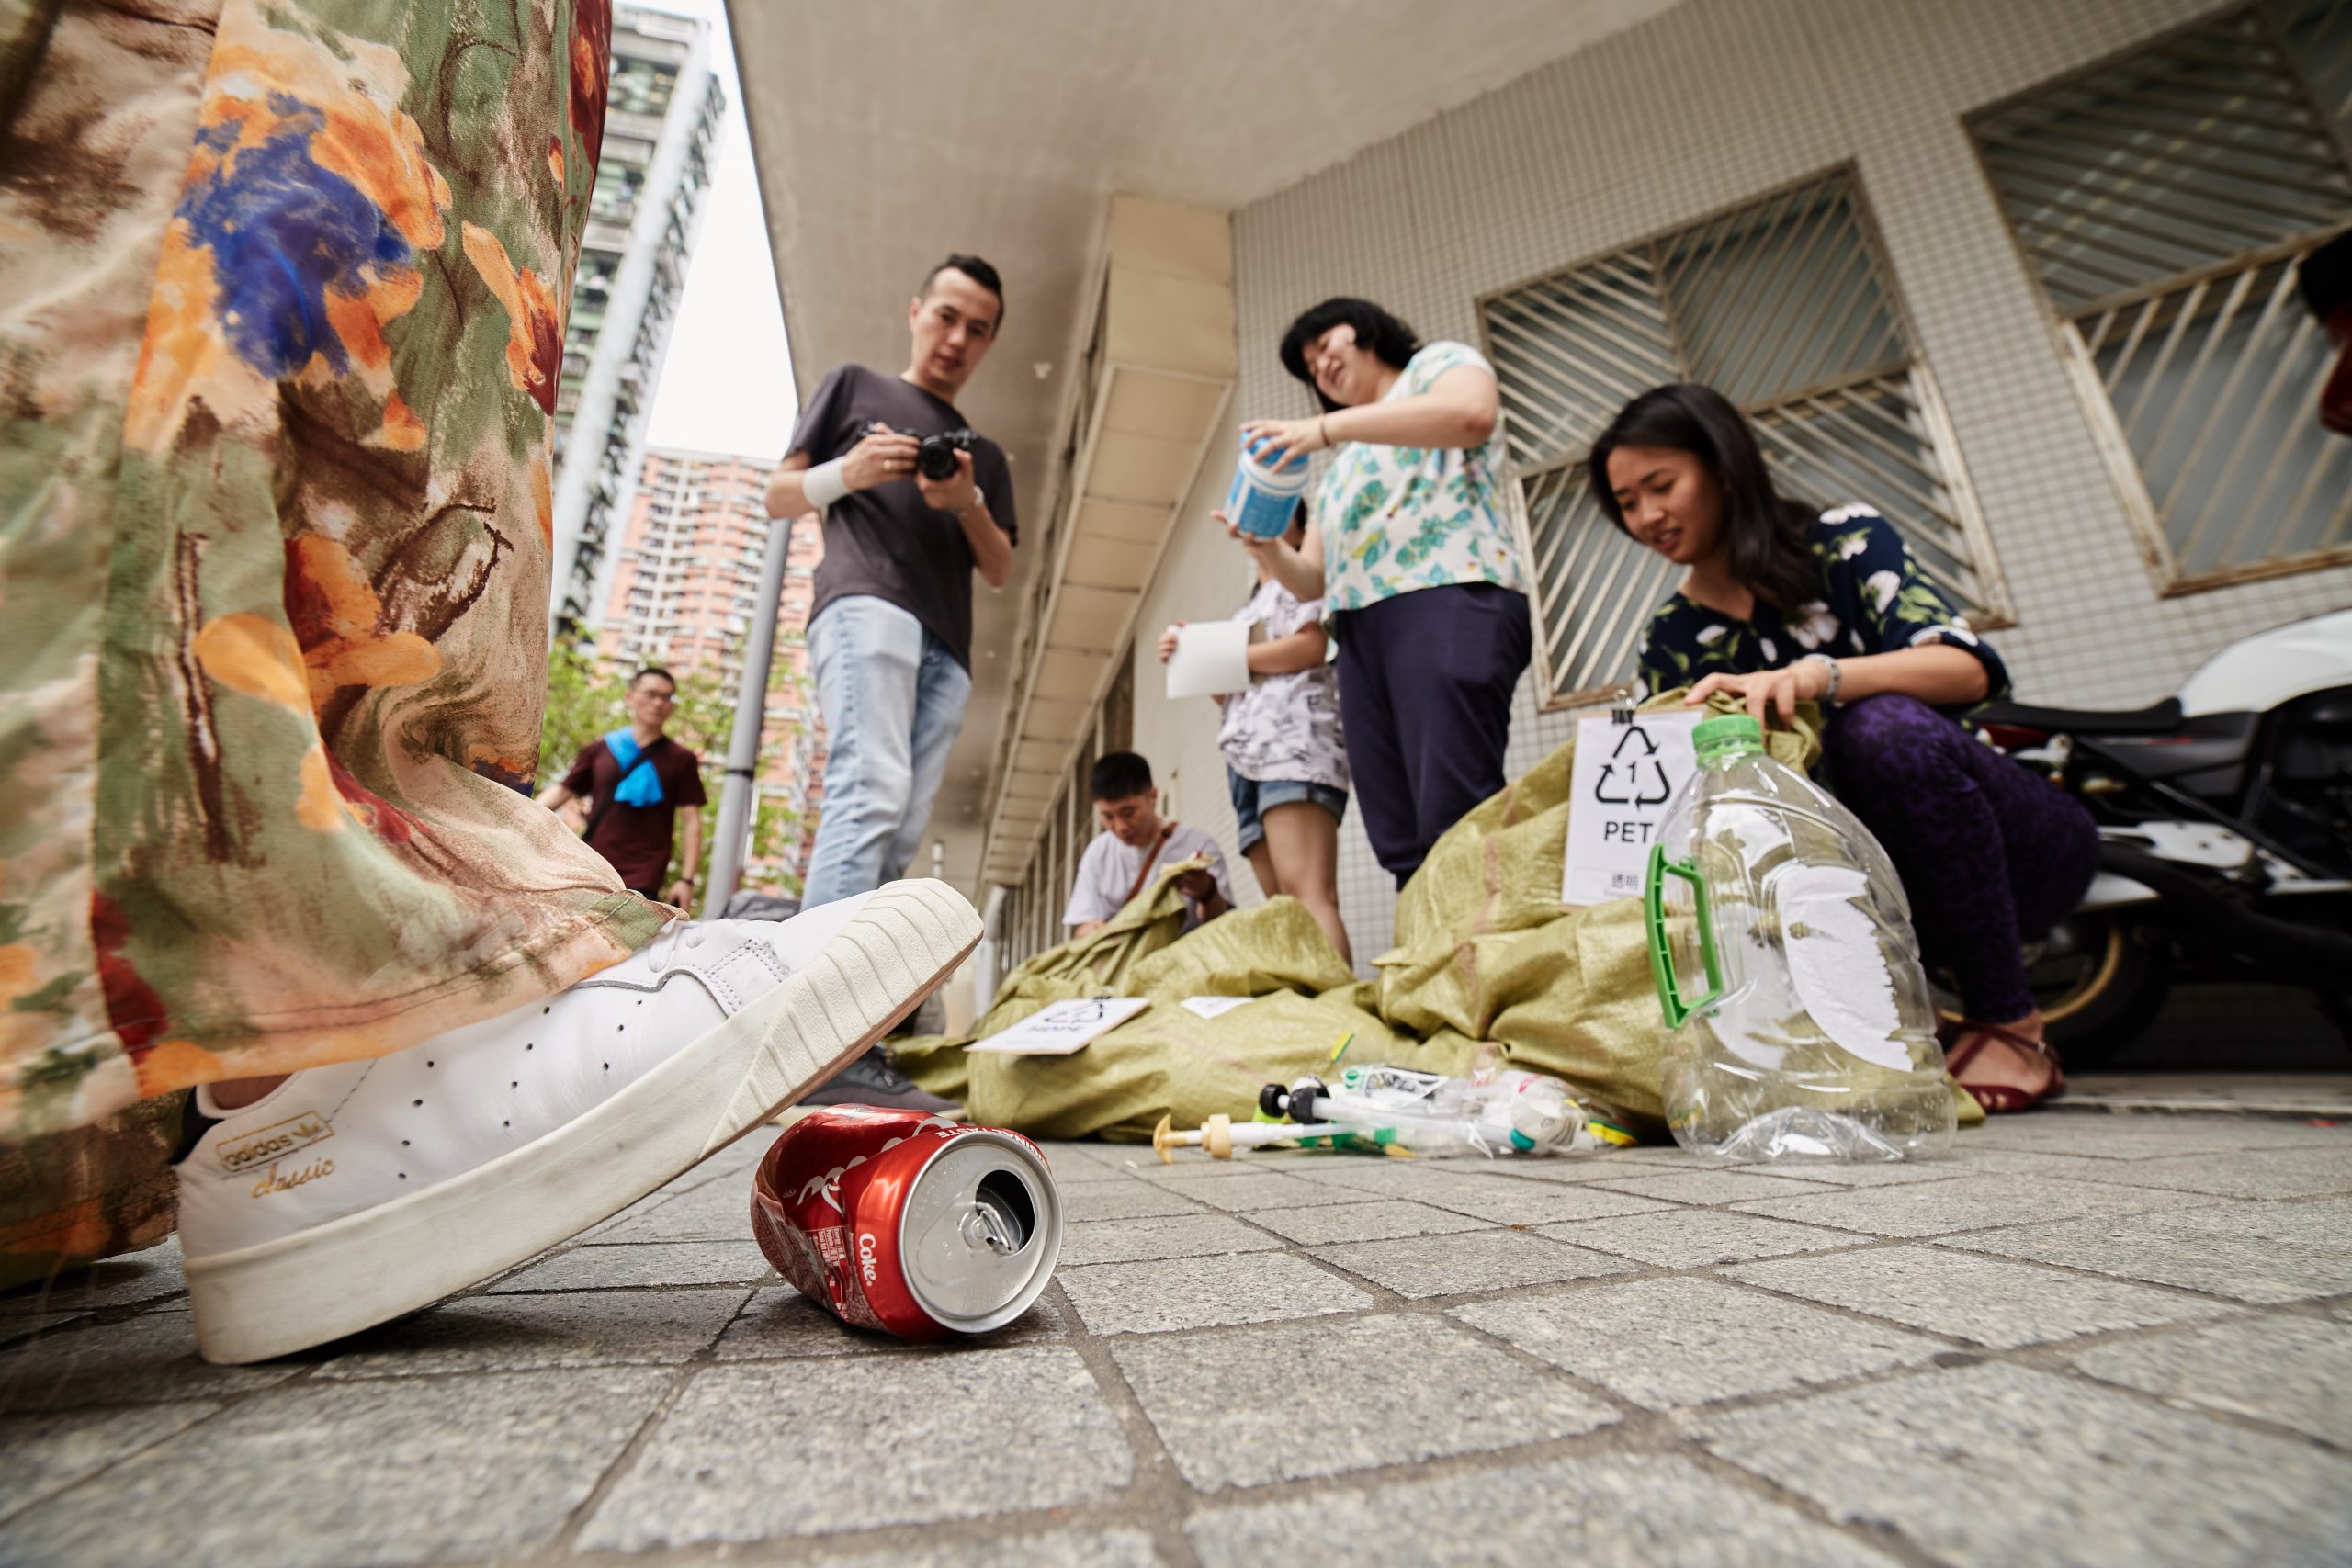 A can is about to be crushed underfoot at a recycling campaign event hosted by Macau for Waste Reduction | Photo by António Sanmarful